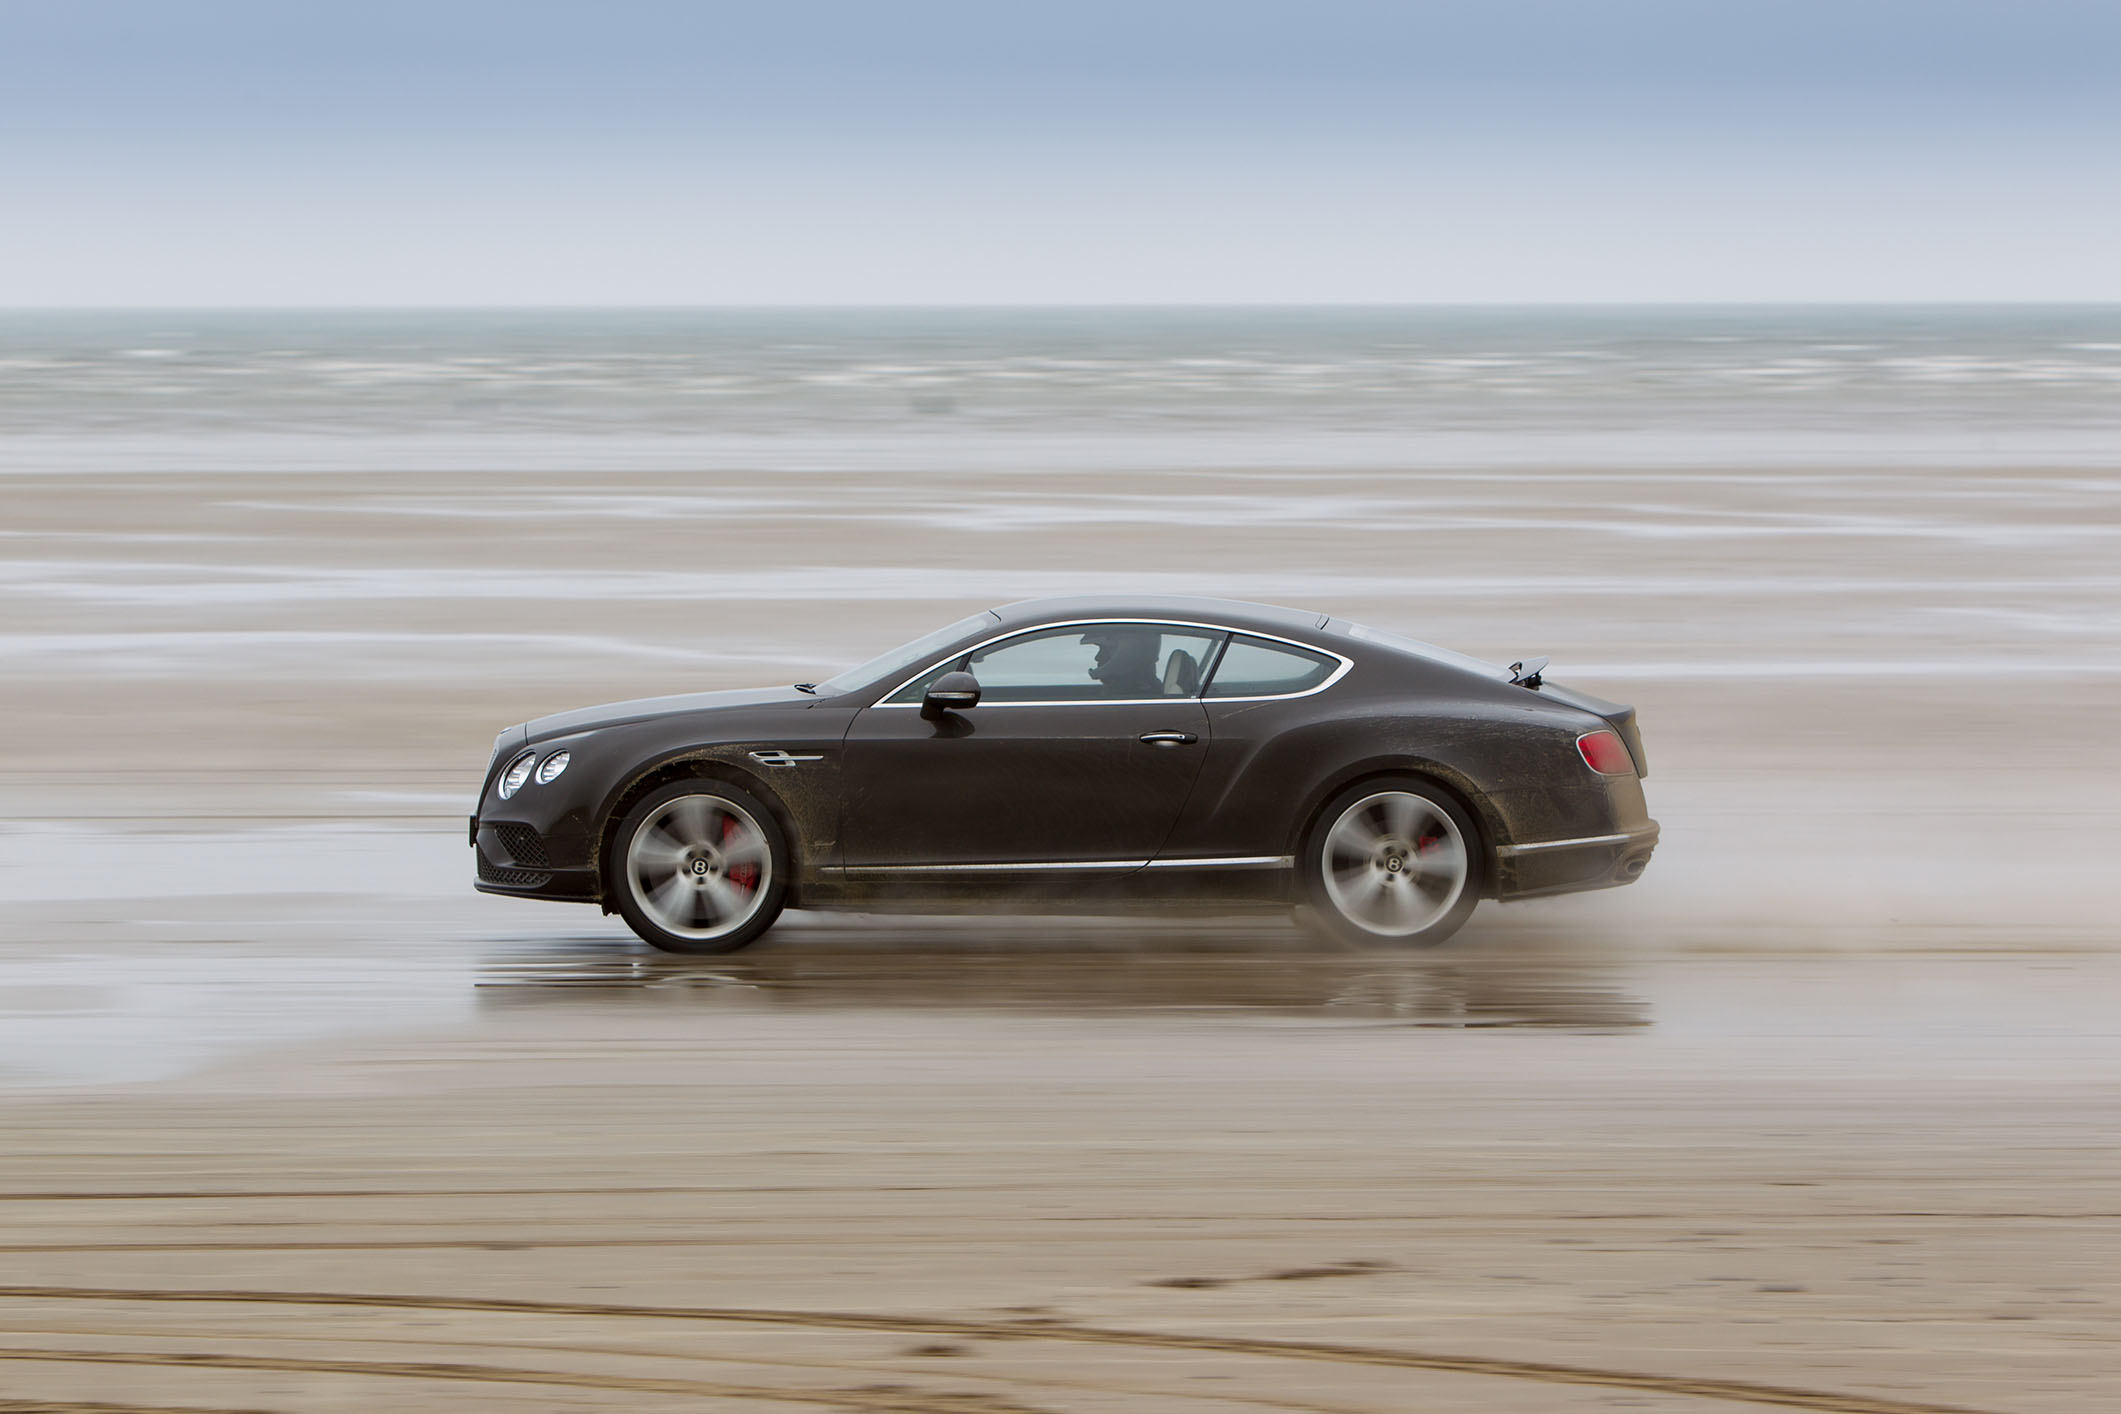 PHOTO: Bentley announced that British actor Idris Elba broke a land speed record by reaching an average speed of 180.361 mph over one mile on Pendine Sands in south Wales.